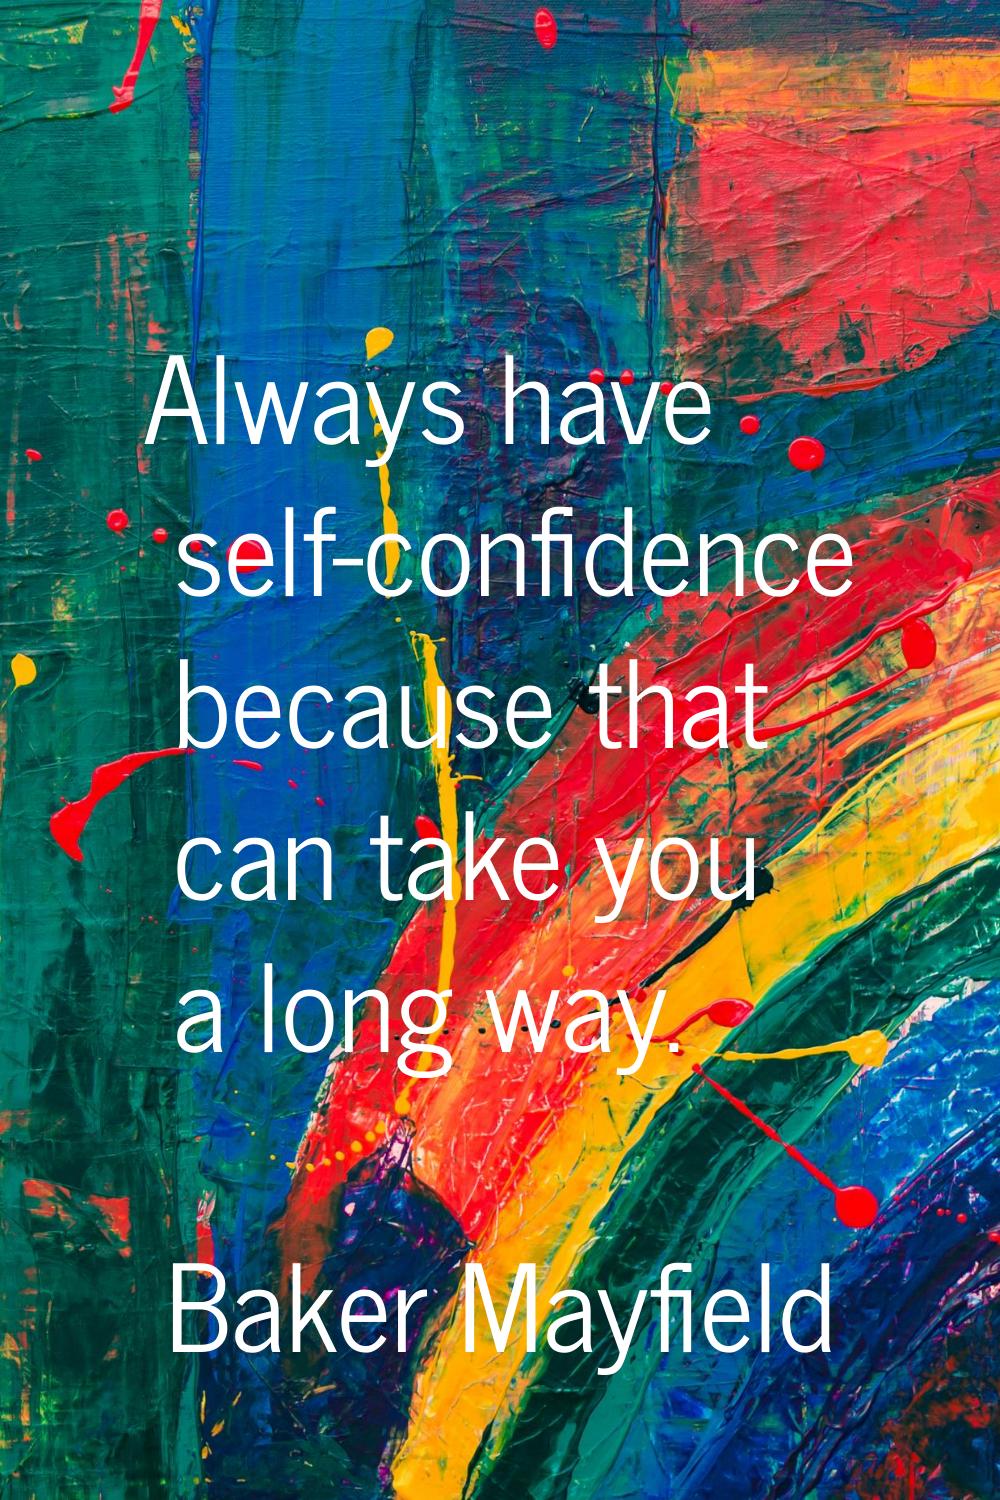 Always have self-confidence because that can take you a long way.